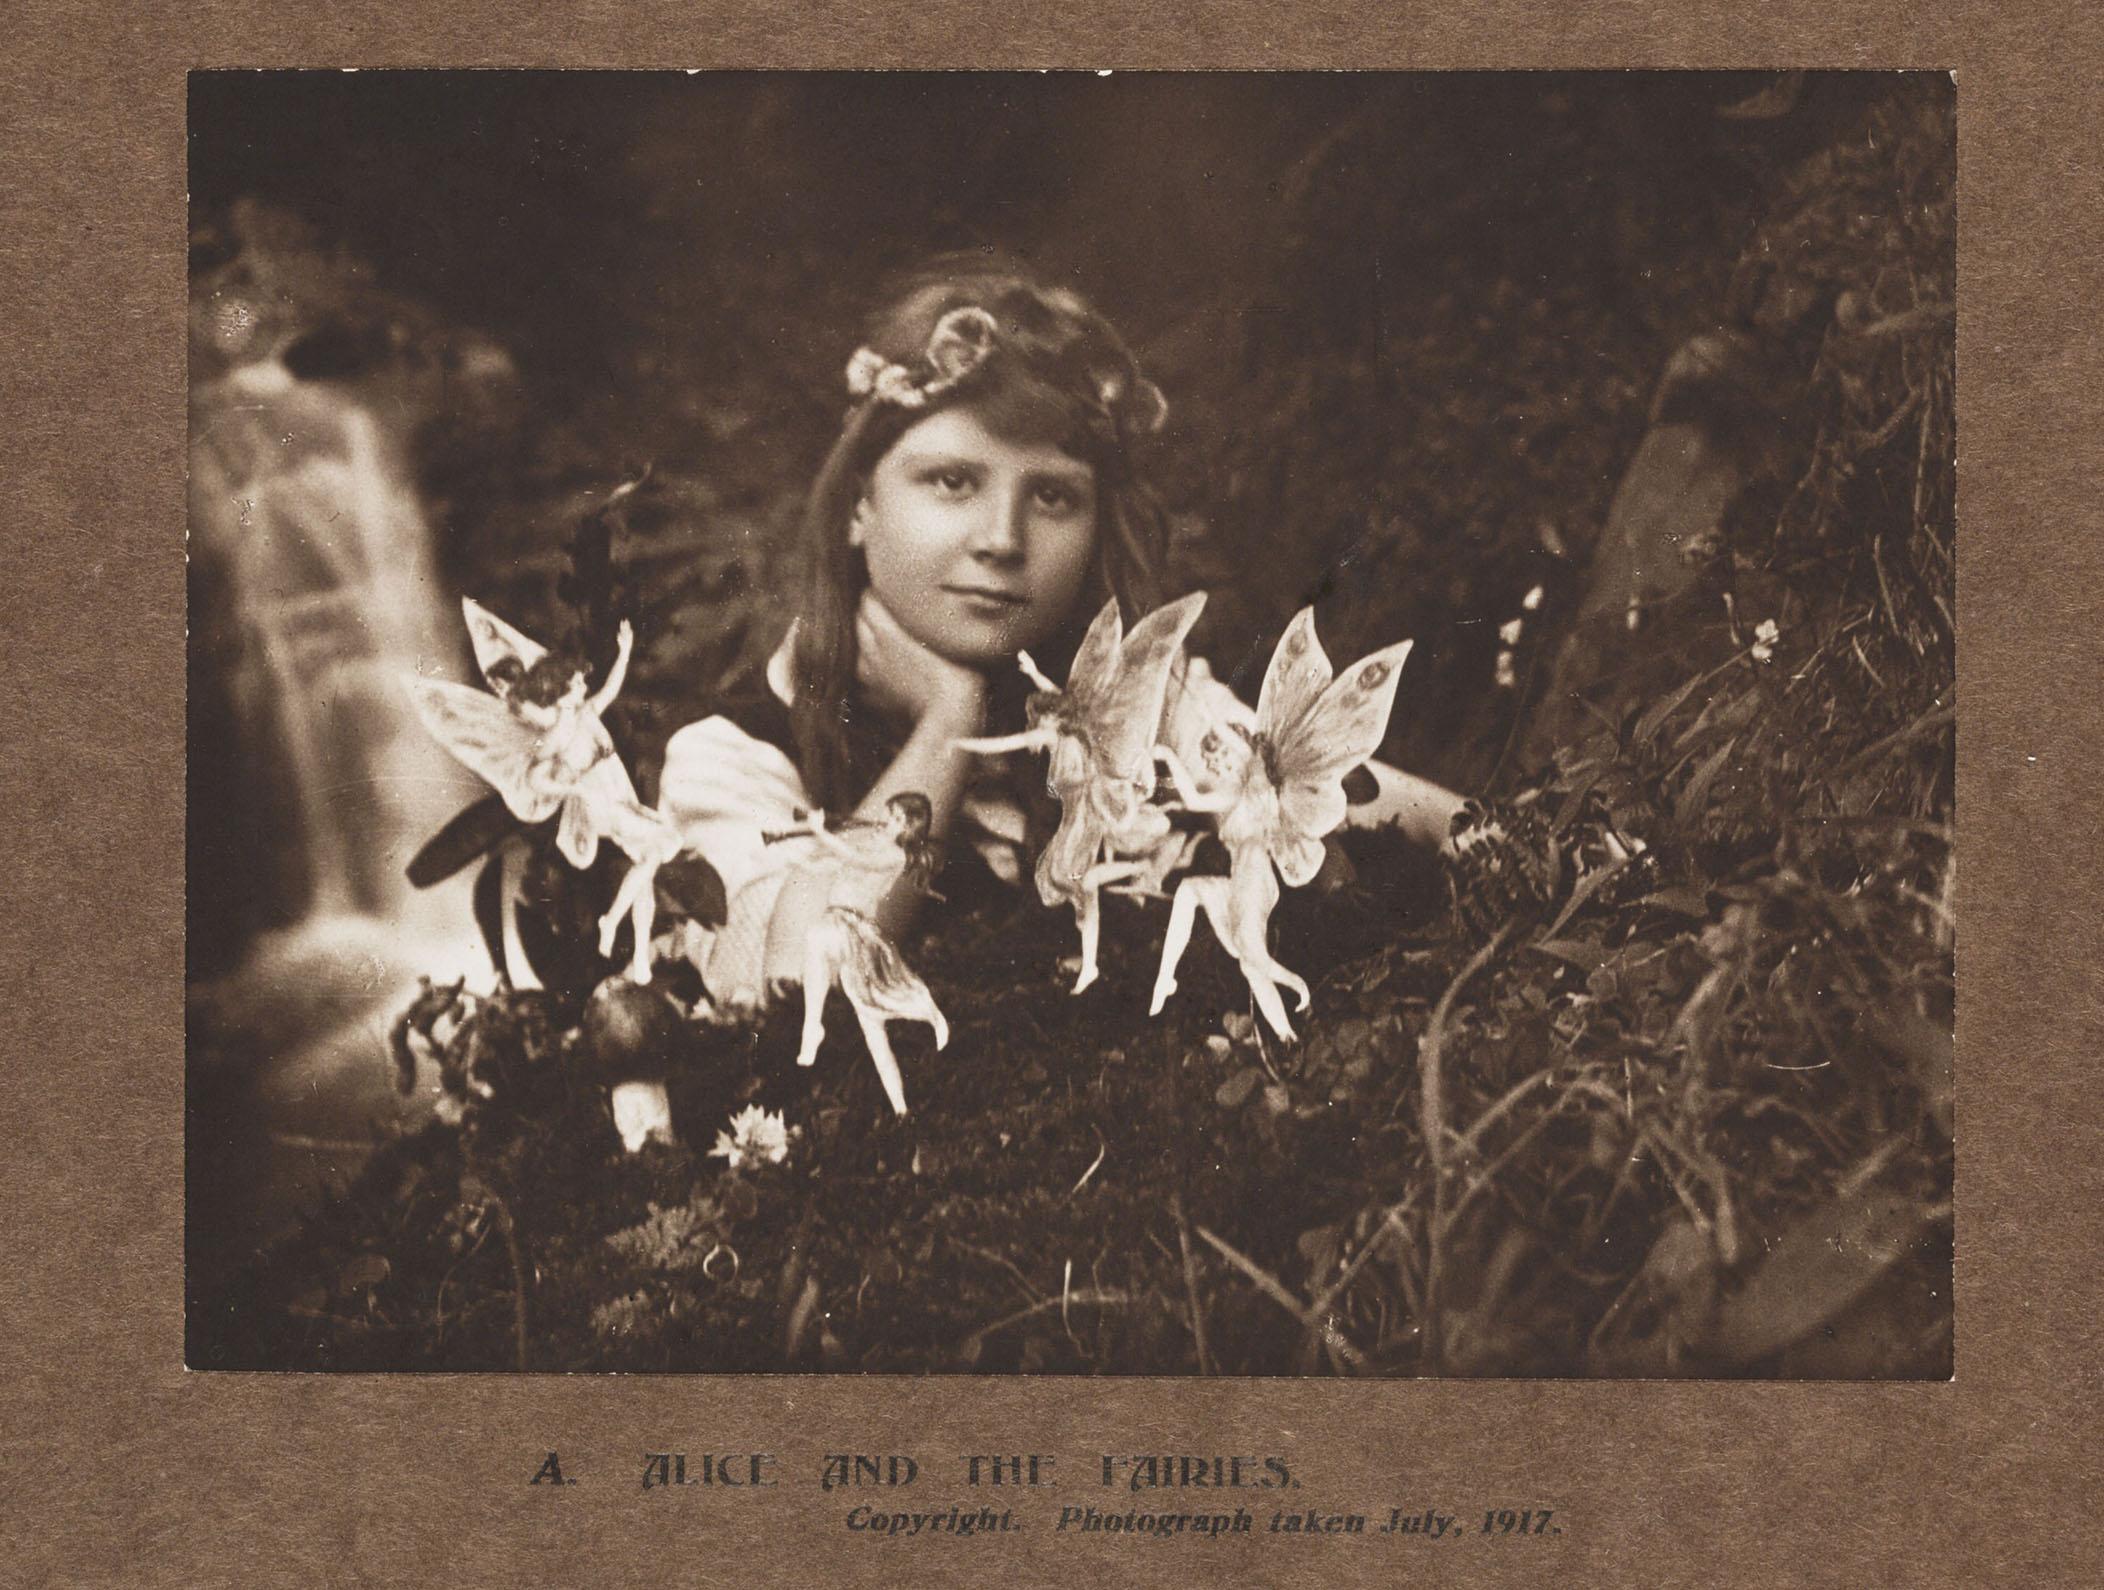 A hundred years ago this doctored photograph duped many into believing there were fairies in Bradford